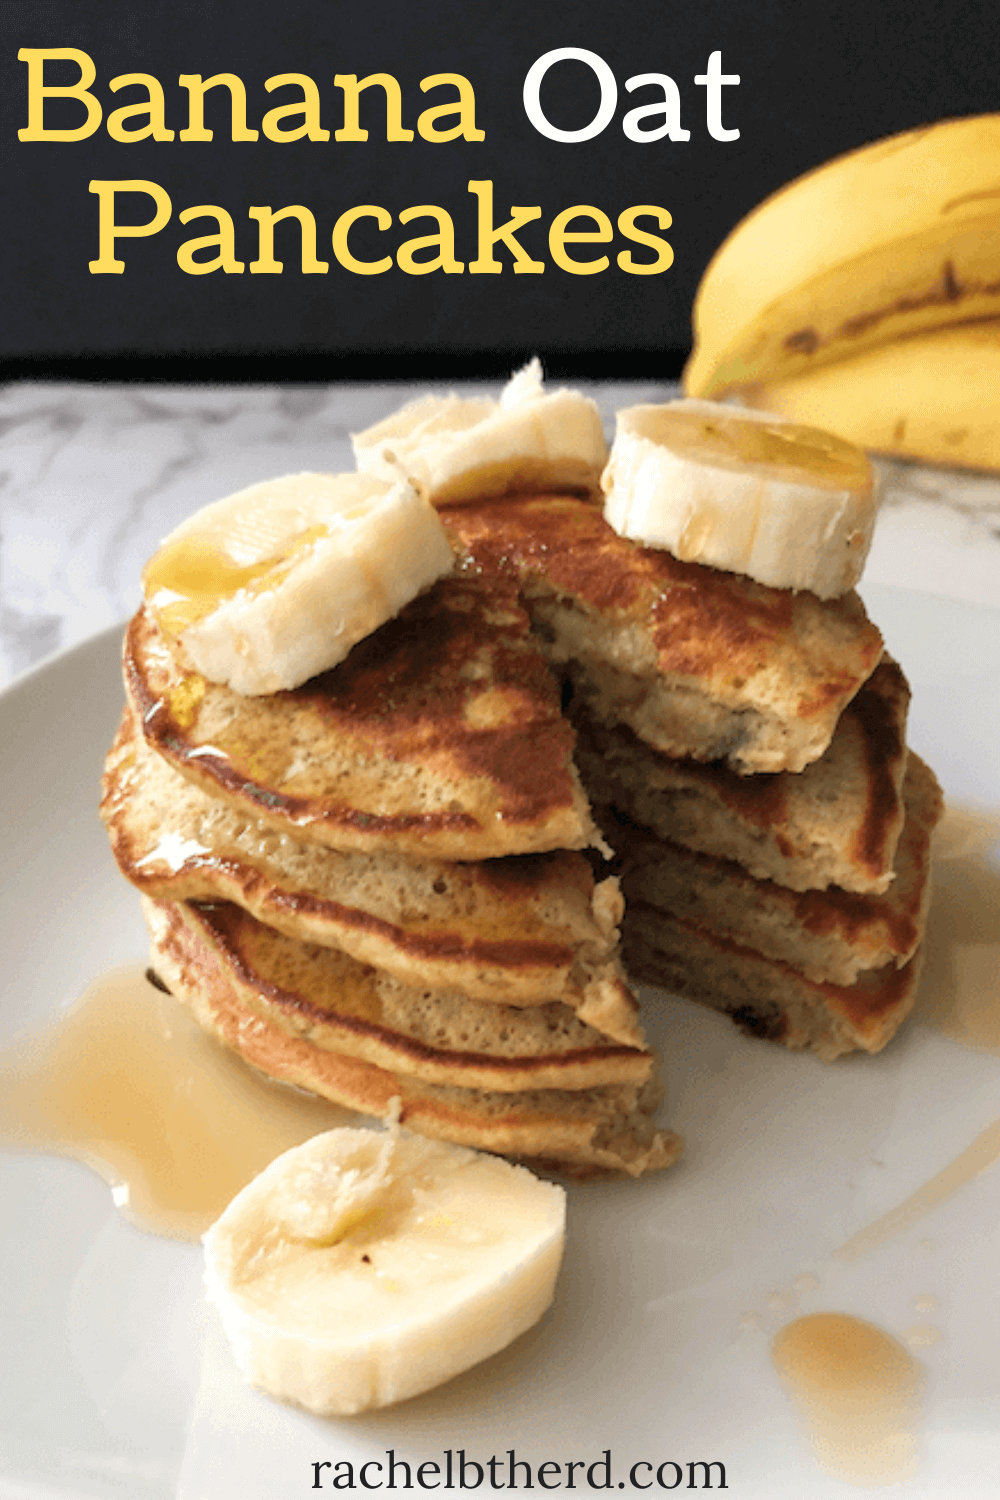 Banana oat pancakes stack with sliced bananas and maple syrup